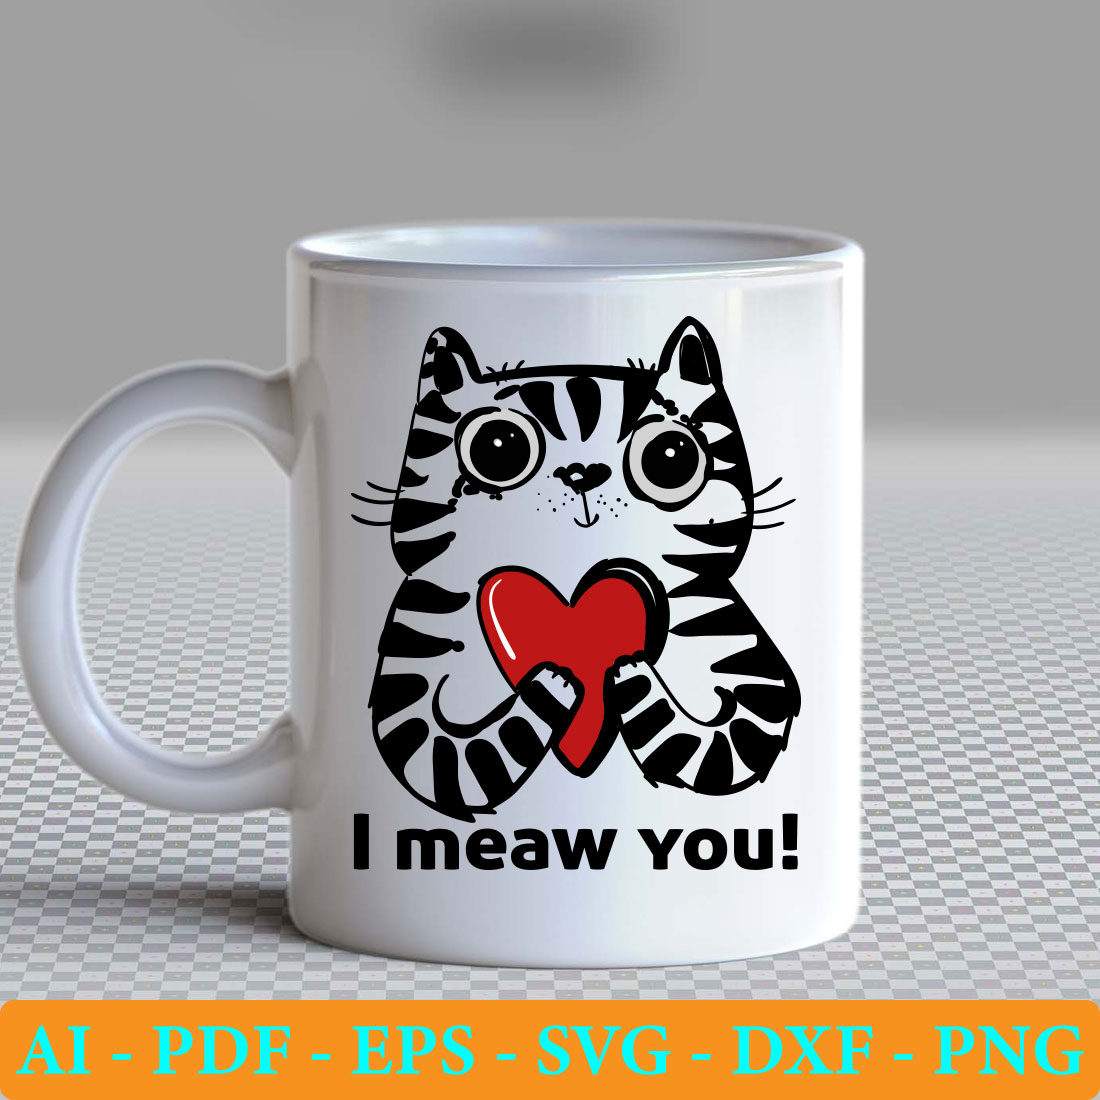 White coffee mug with a cat holding a heart.